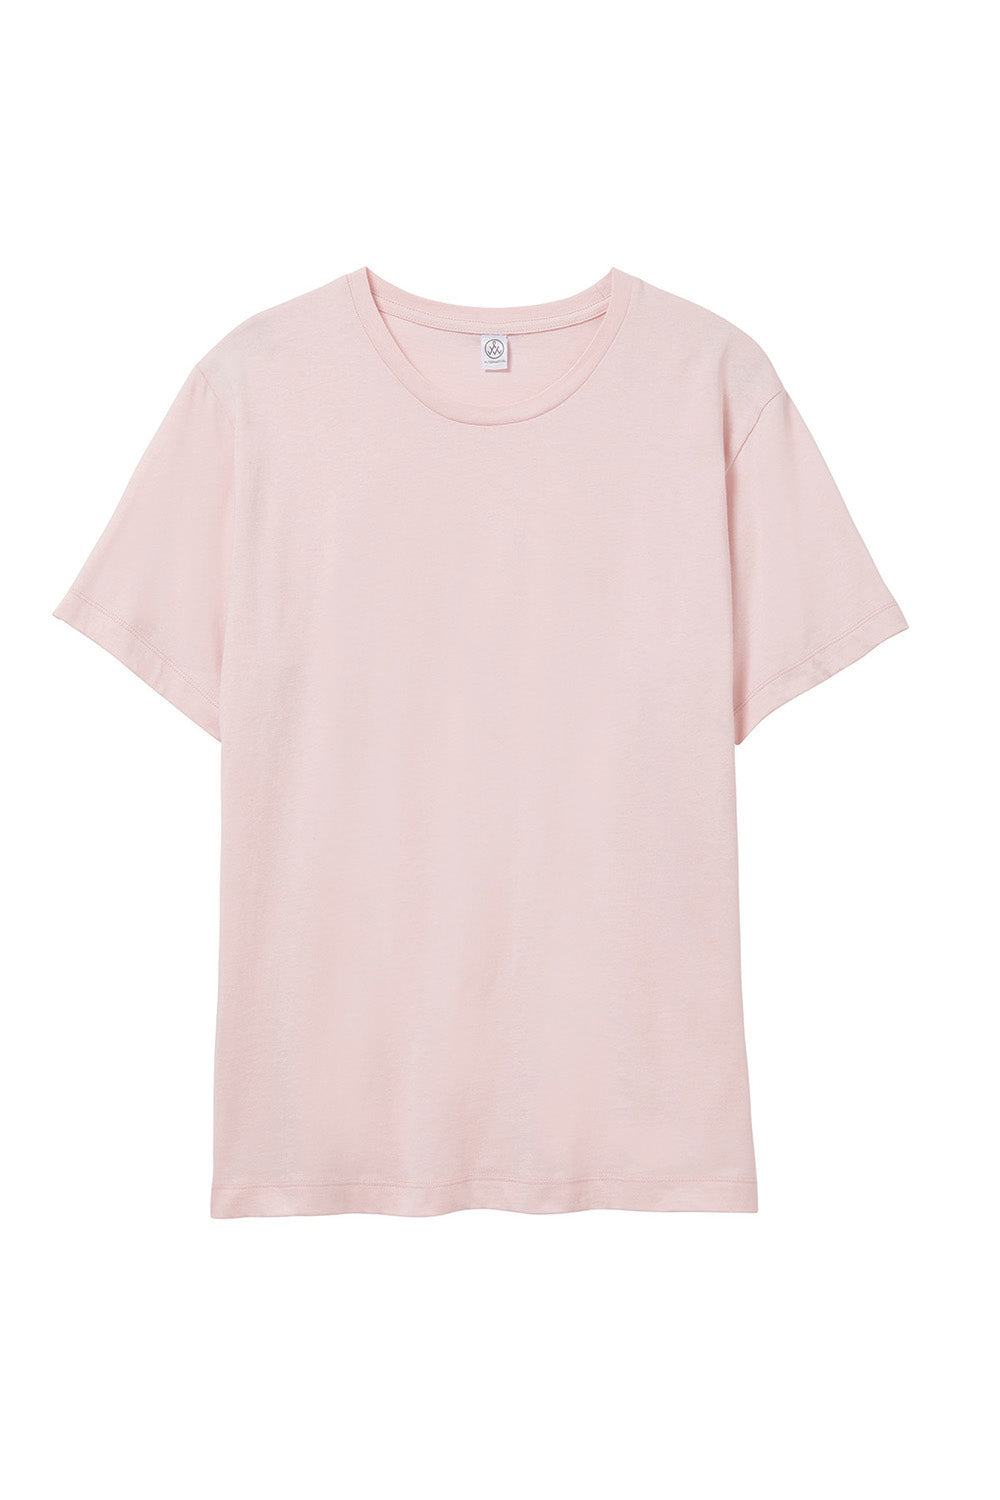 Alternative AA1070/1070 Mens Go To Jersey Short Sleeve Crewneck T-Shirt Faded Pink Flat Front